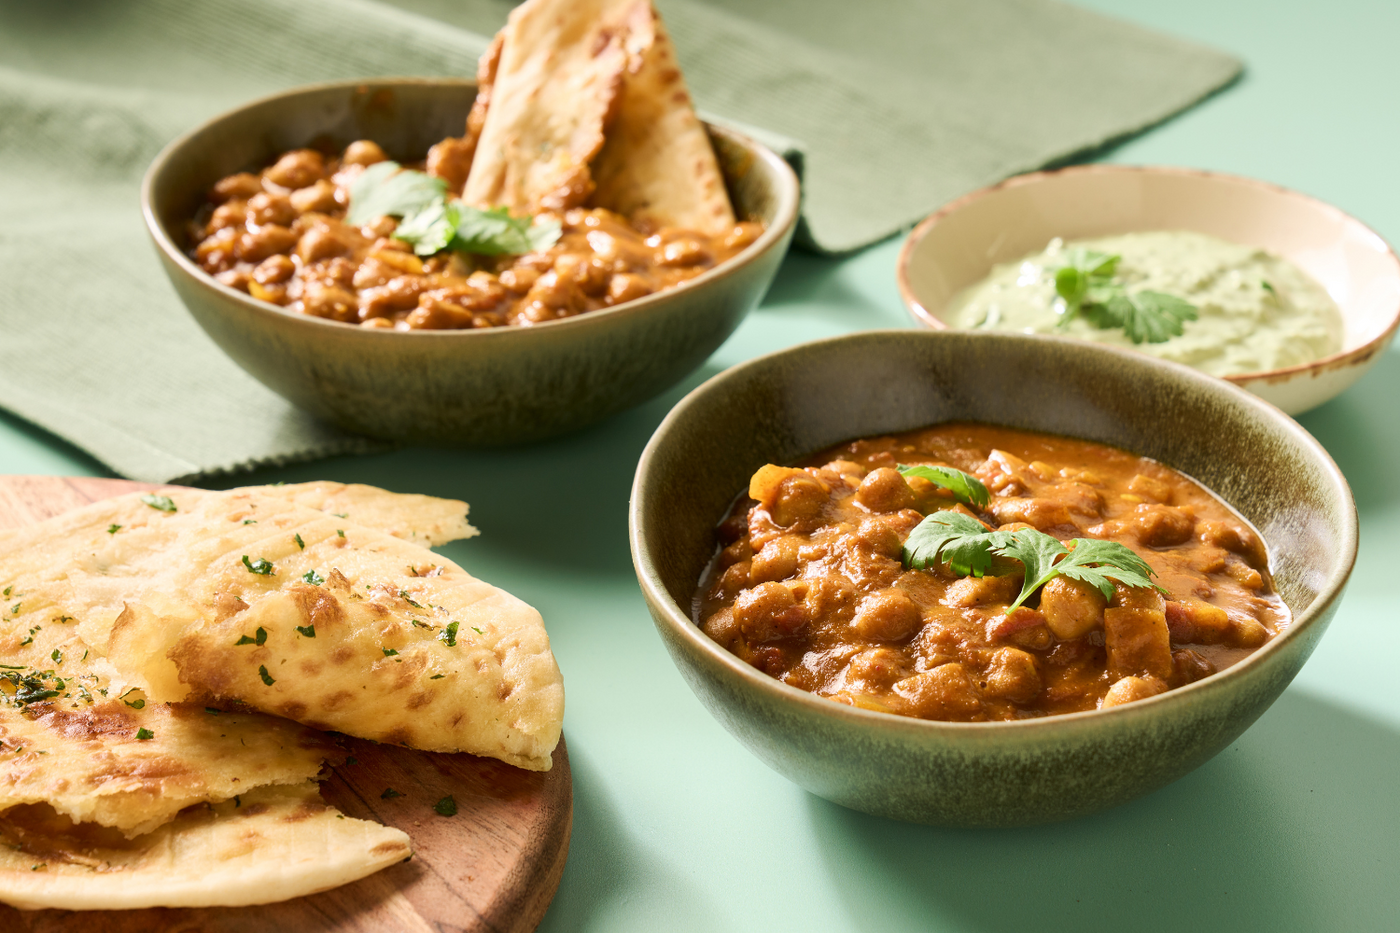 Chickpea curry with raita and naan